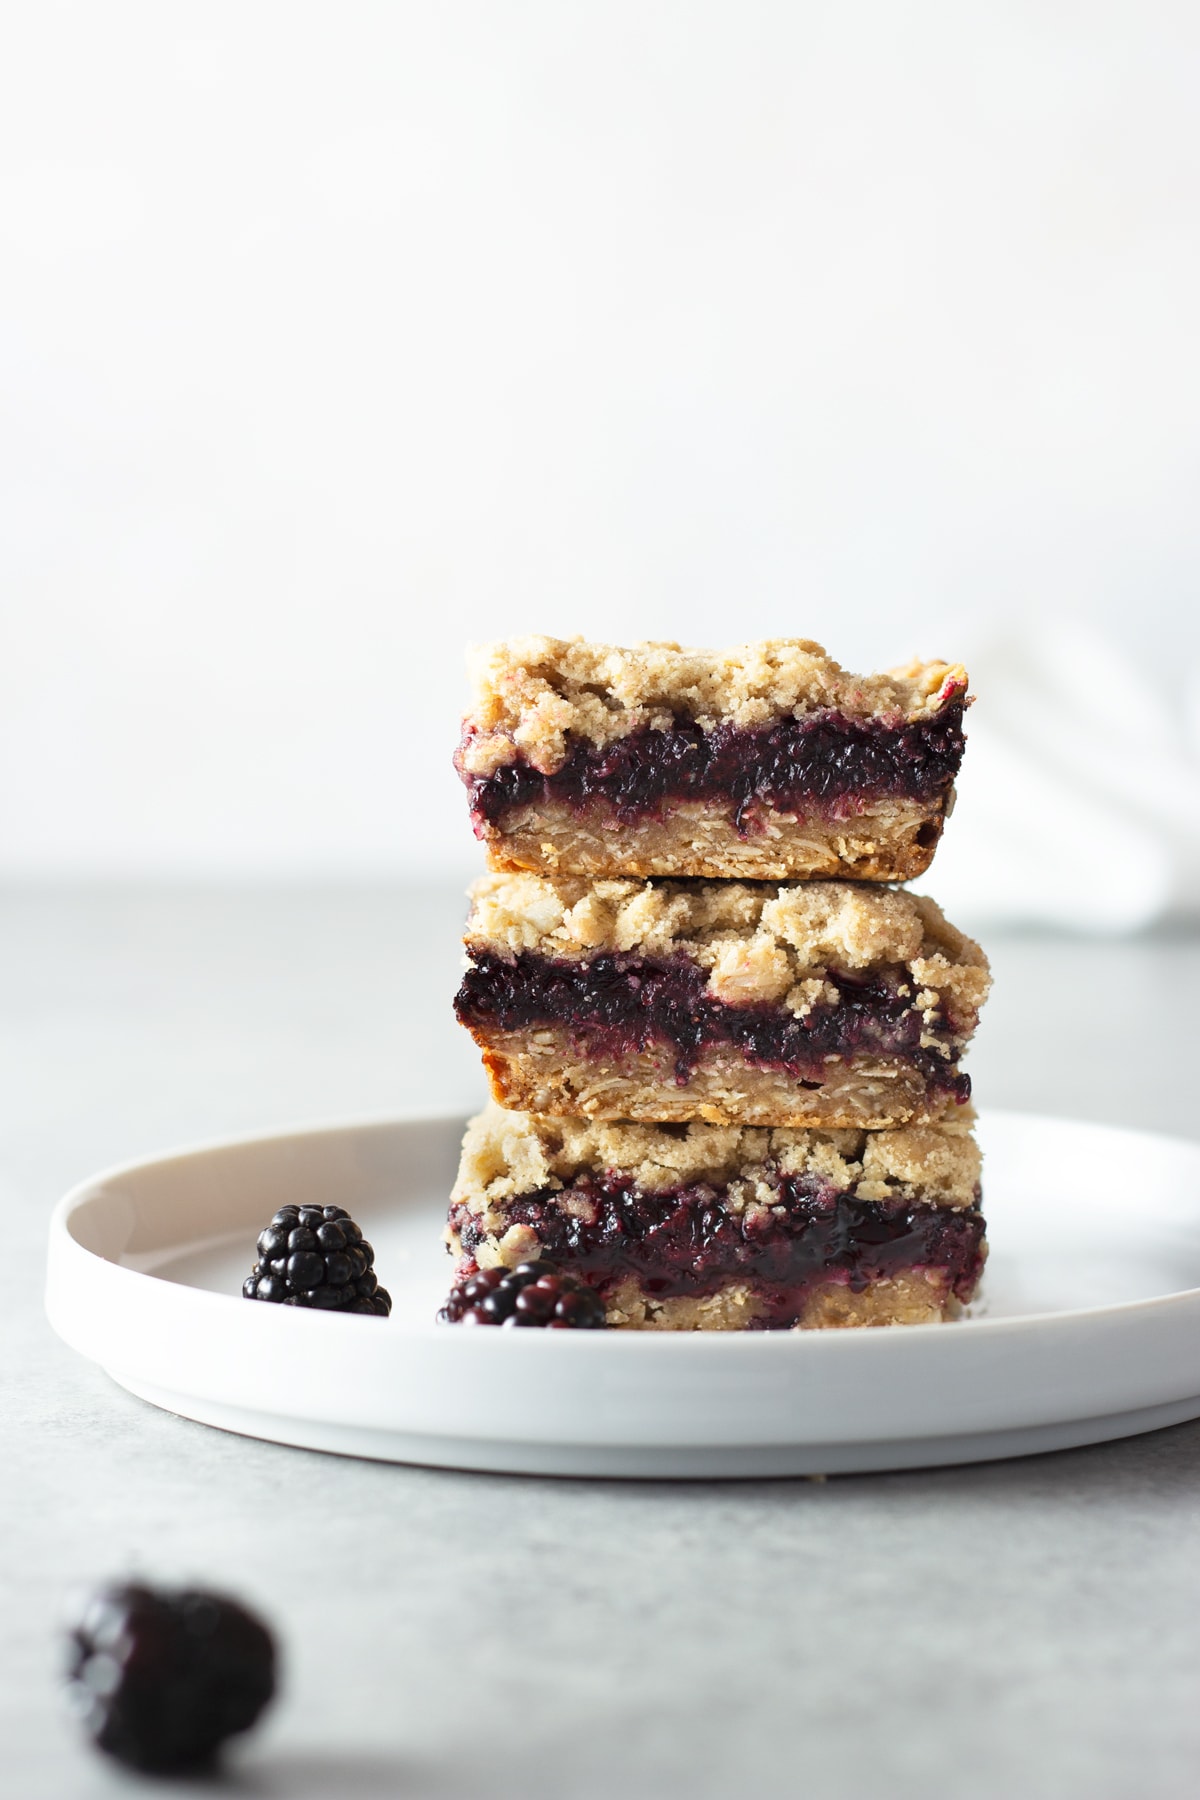 Straight on view of a stack of 3 Blackberry Crumble Bars on a white plate with a light background.